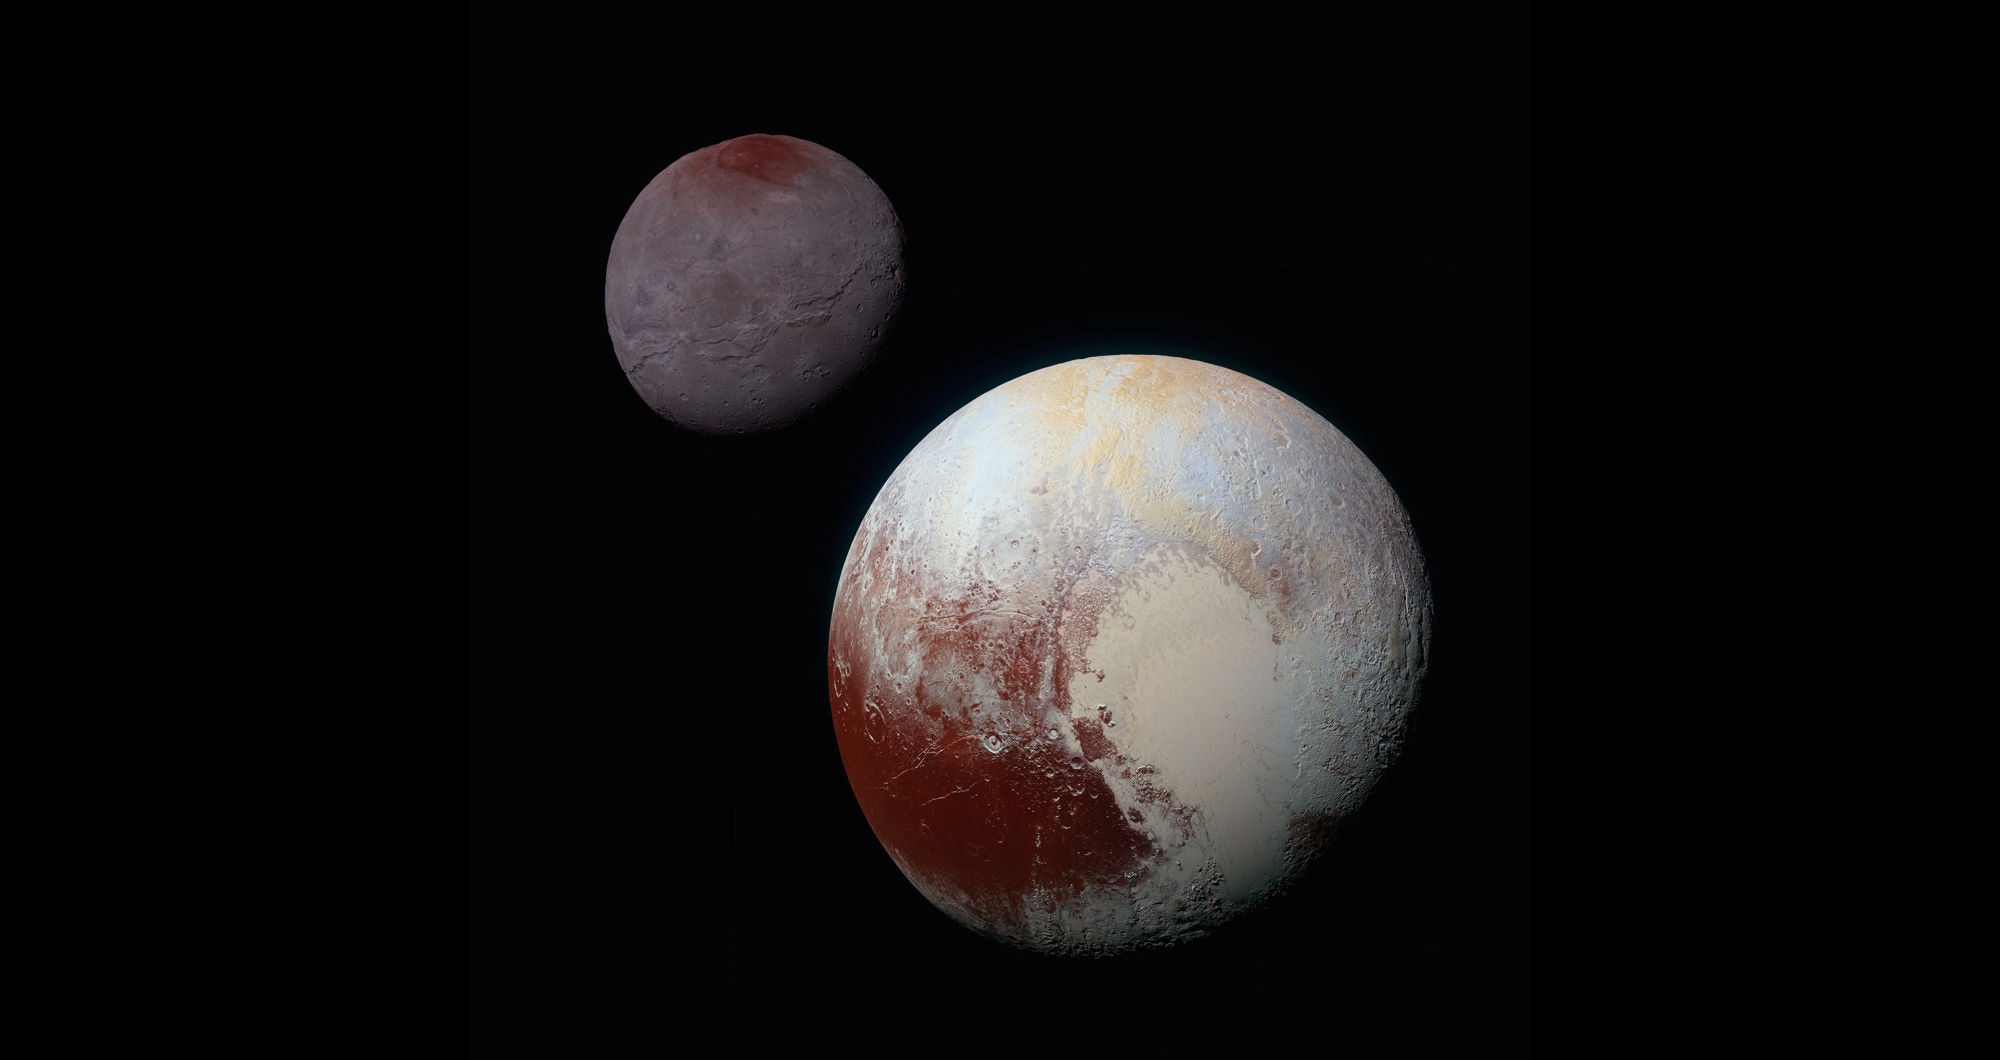 Pluto may have once had huge cryovolcanic ice flows